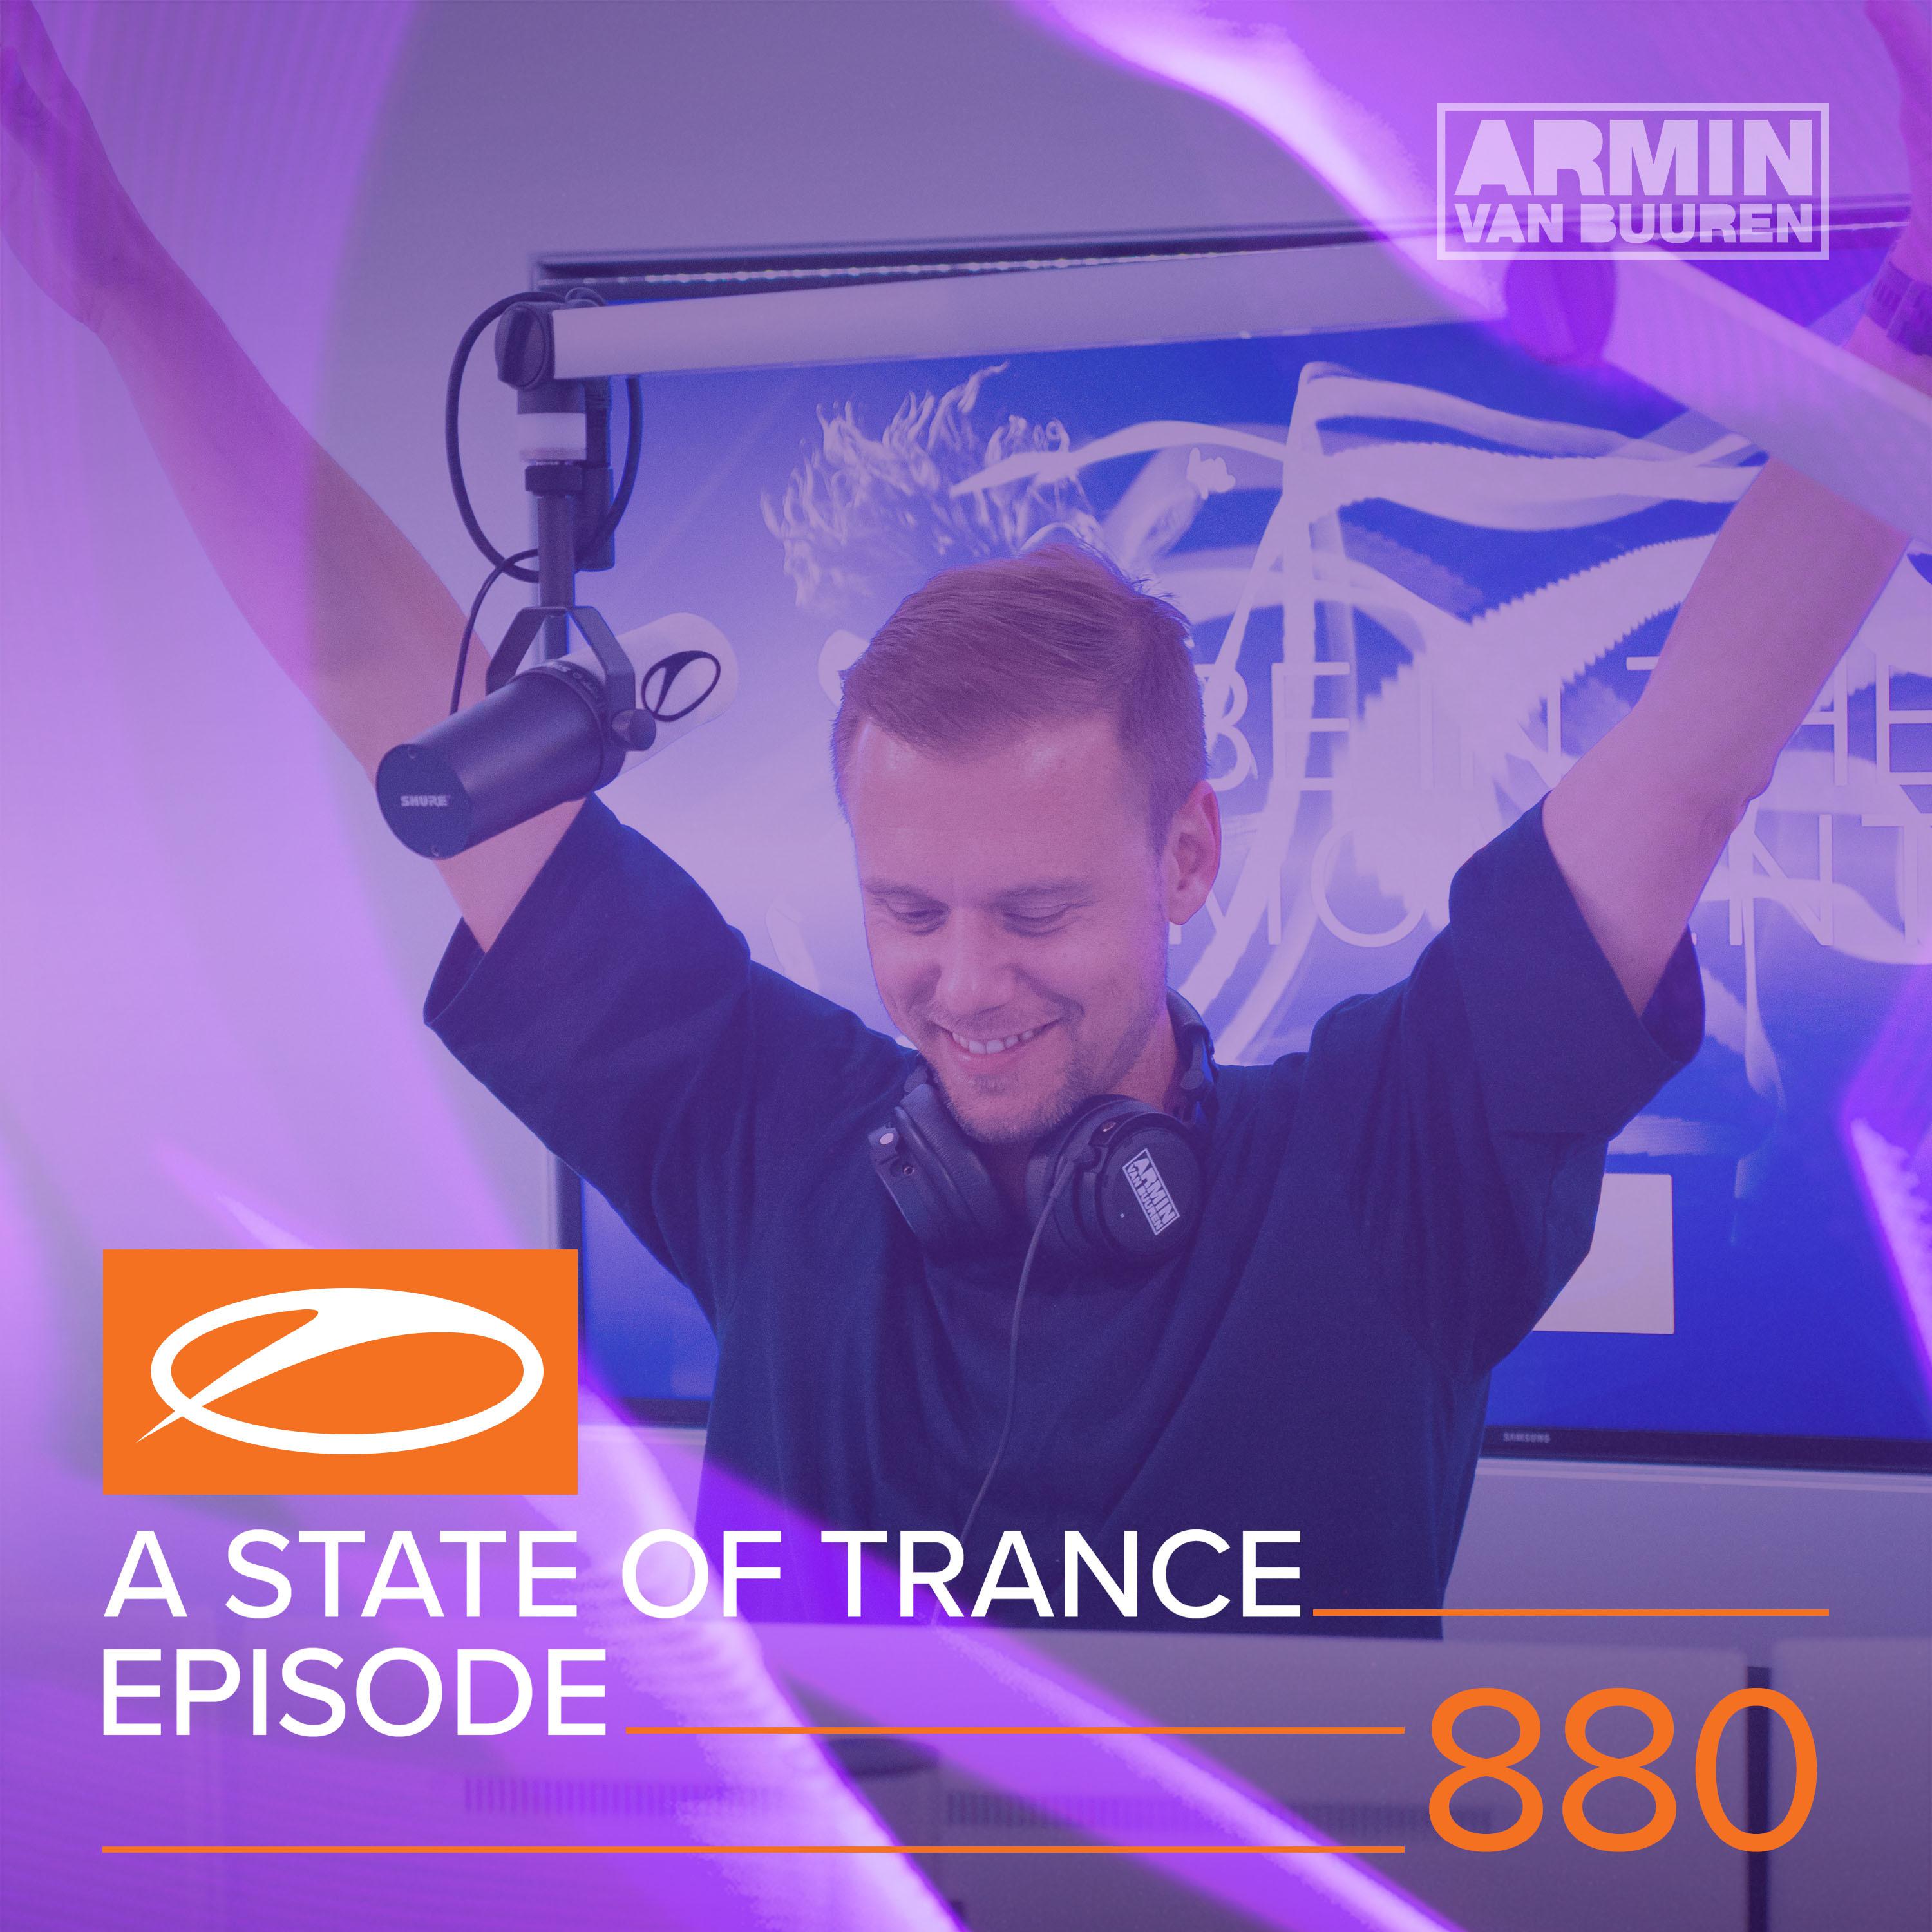 A State Of Trance (ASOT 880) (Outro)